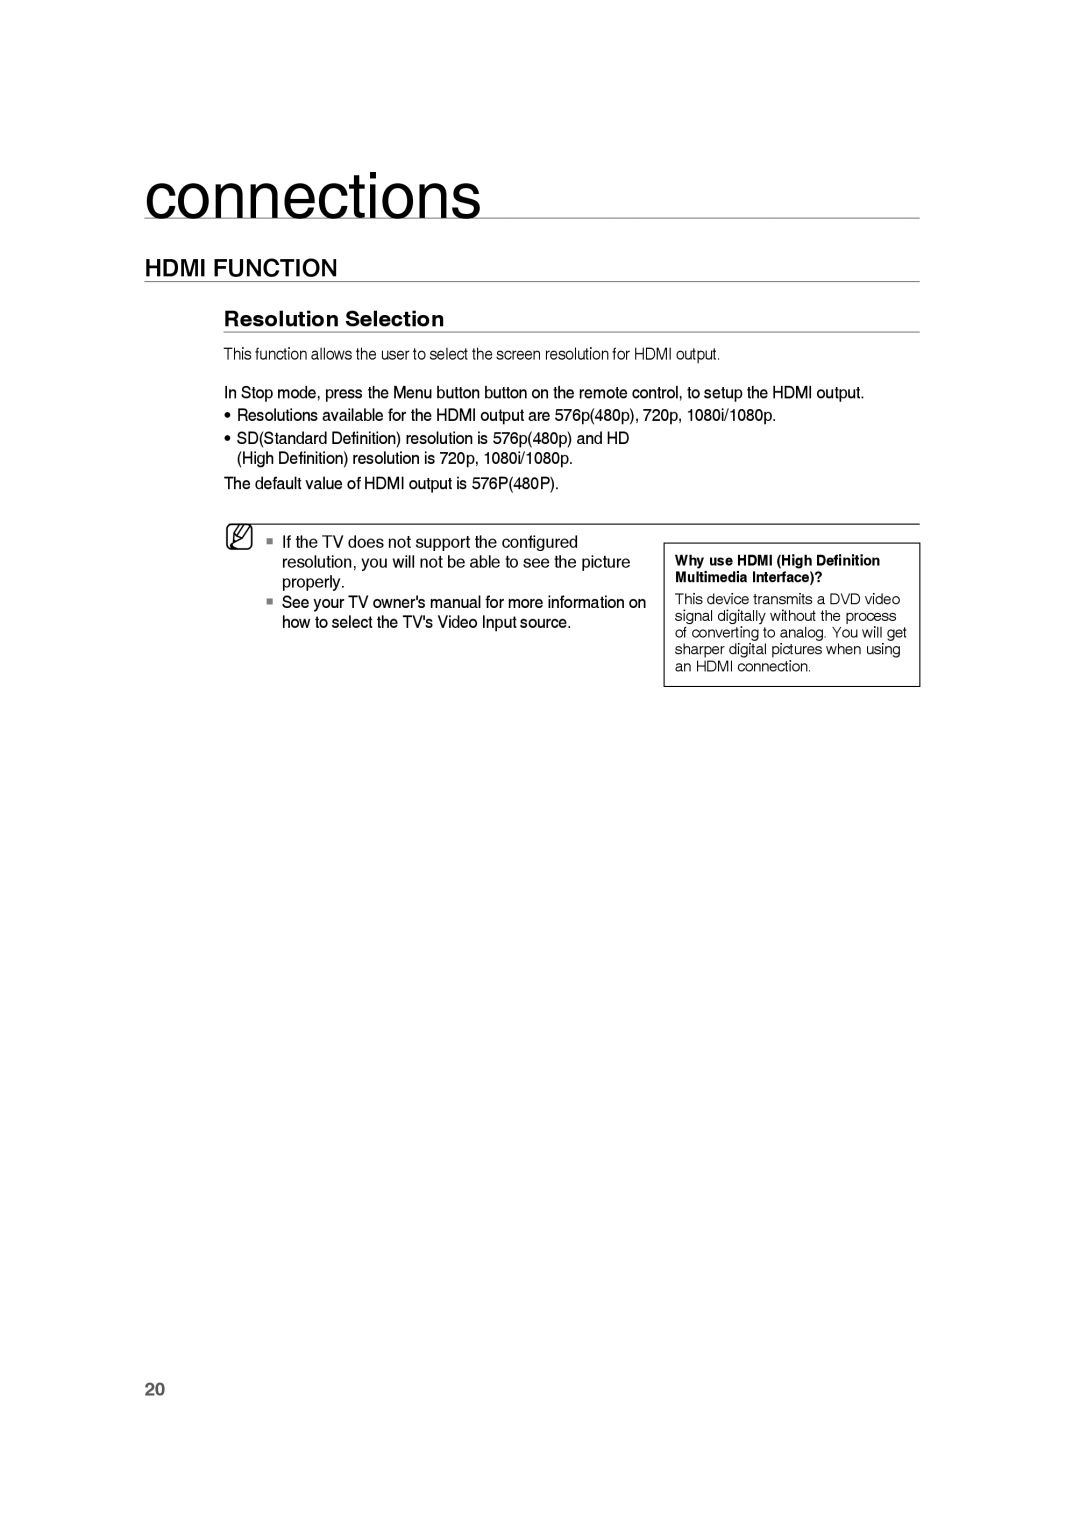 Samsung HE10T user manual Hdmi Function, Resolution Selection, connections 